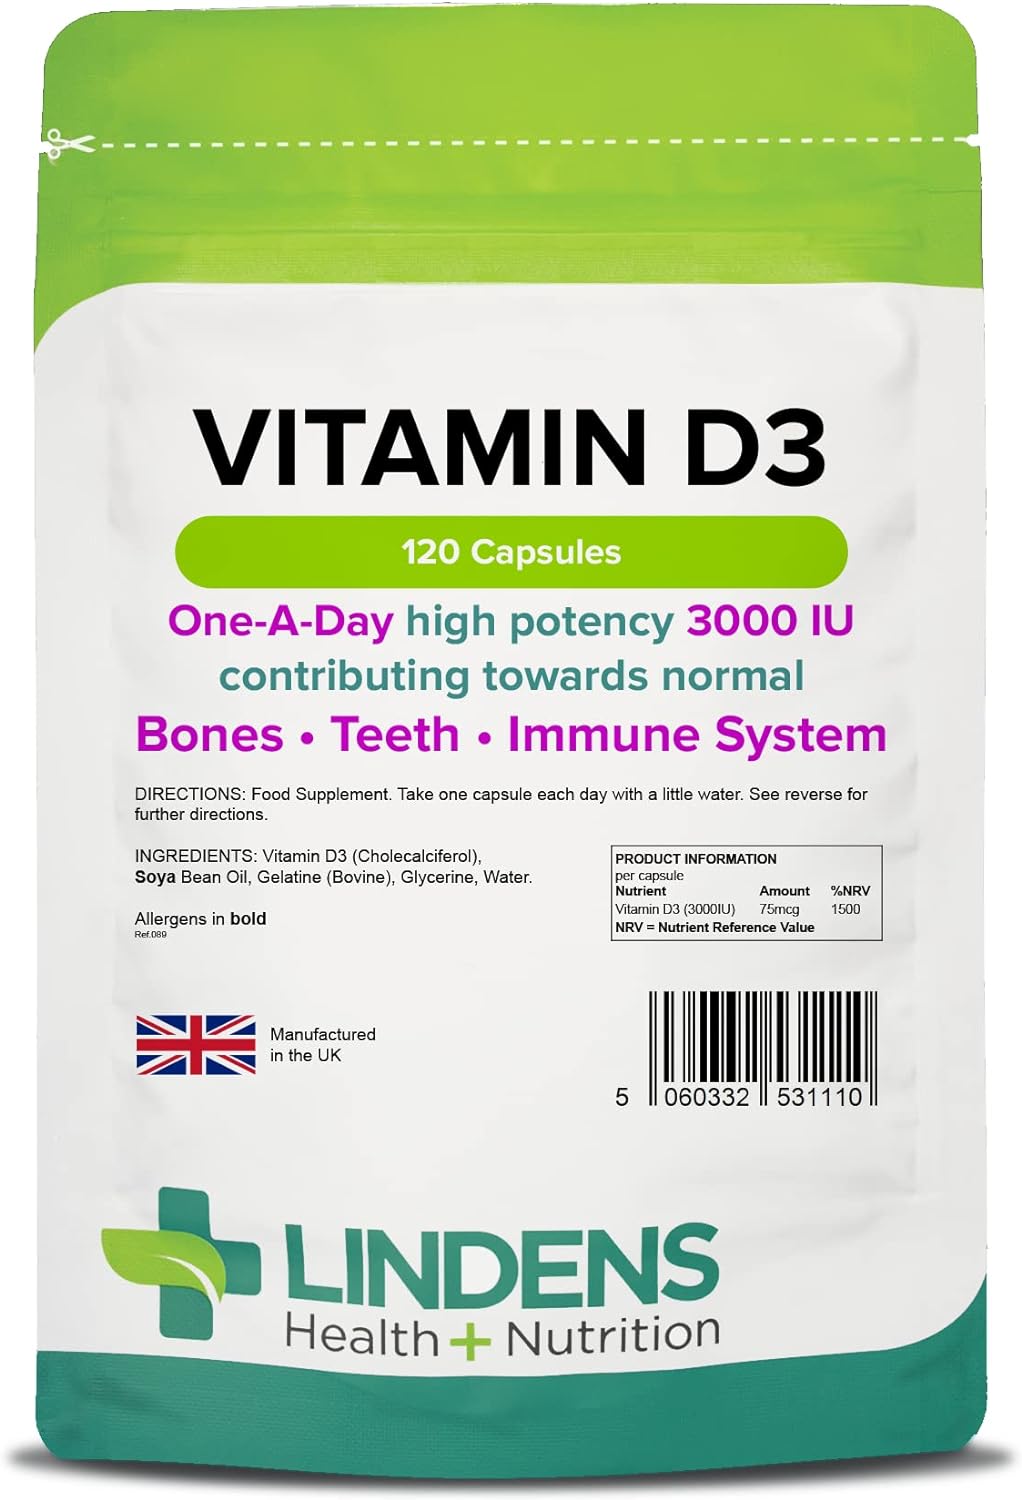 Lindens Vitamin D3 3000IU - 120 Capsules - High-Potency - 1500% NRV - Contributes to Normal Bones, Teeth & Immune System - 4 Months Supply - GMP & Letterbox Friendly - UK Made